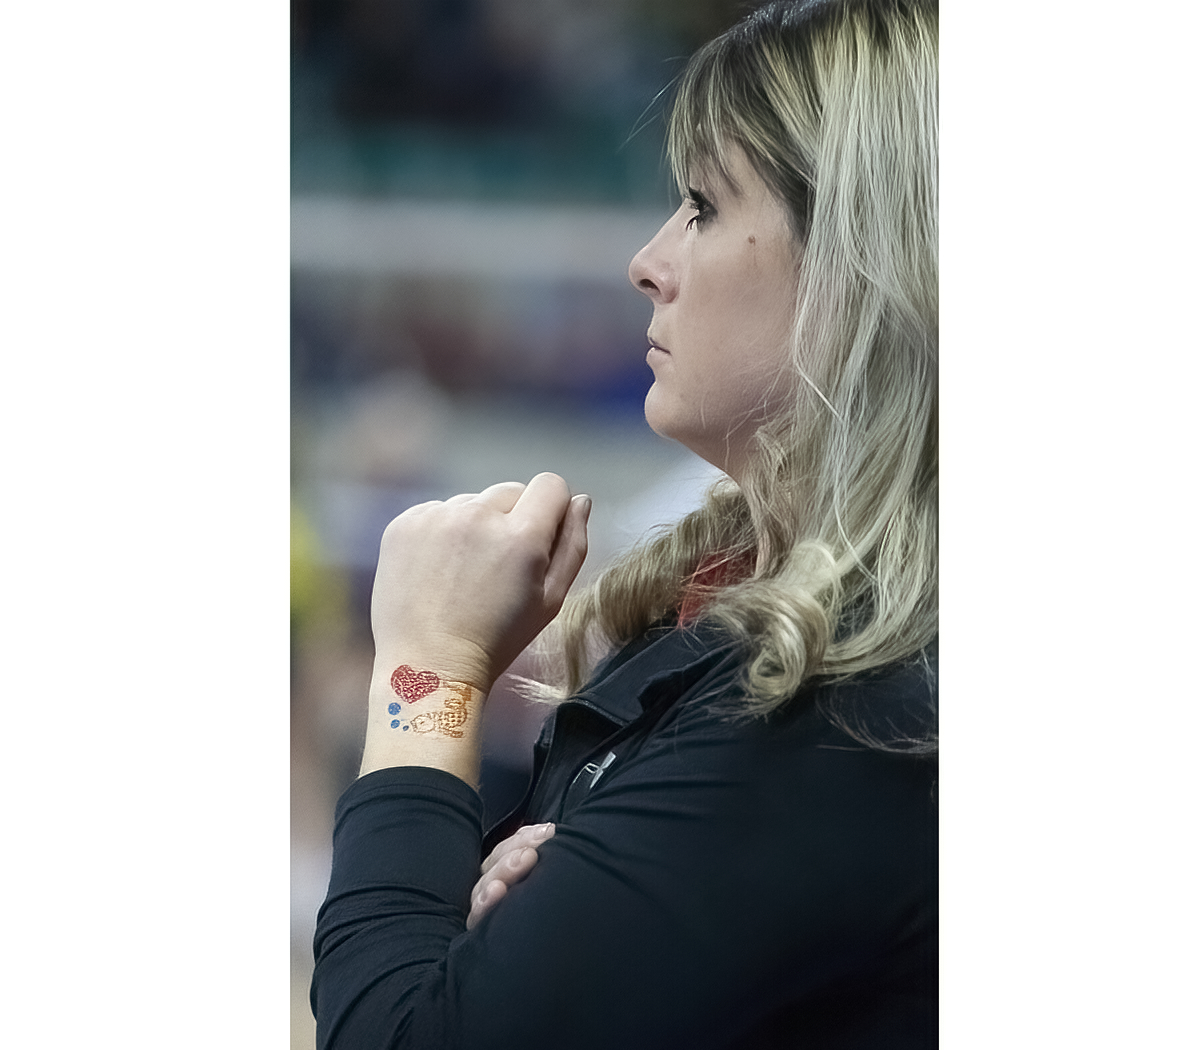 Head Coach Amber Huff, wearing the press-on tattoo that all the Lady Redhawks wore during the tourney, looks on with concern.